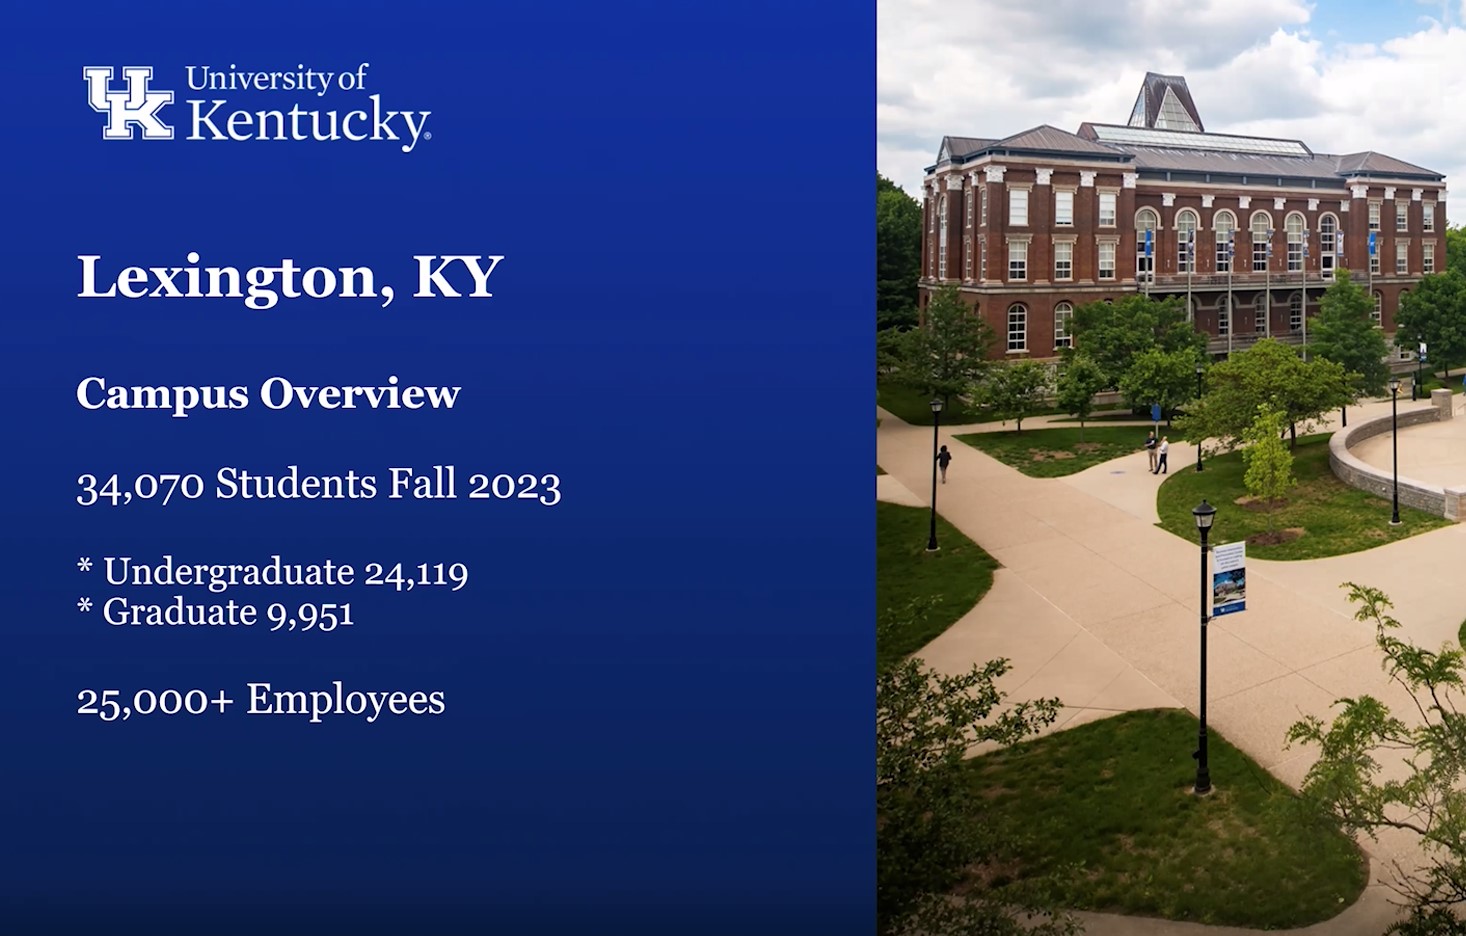 University of Kentucky Card Office & Access Control Overview